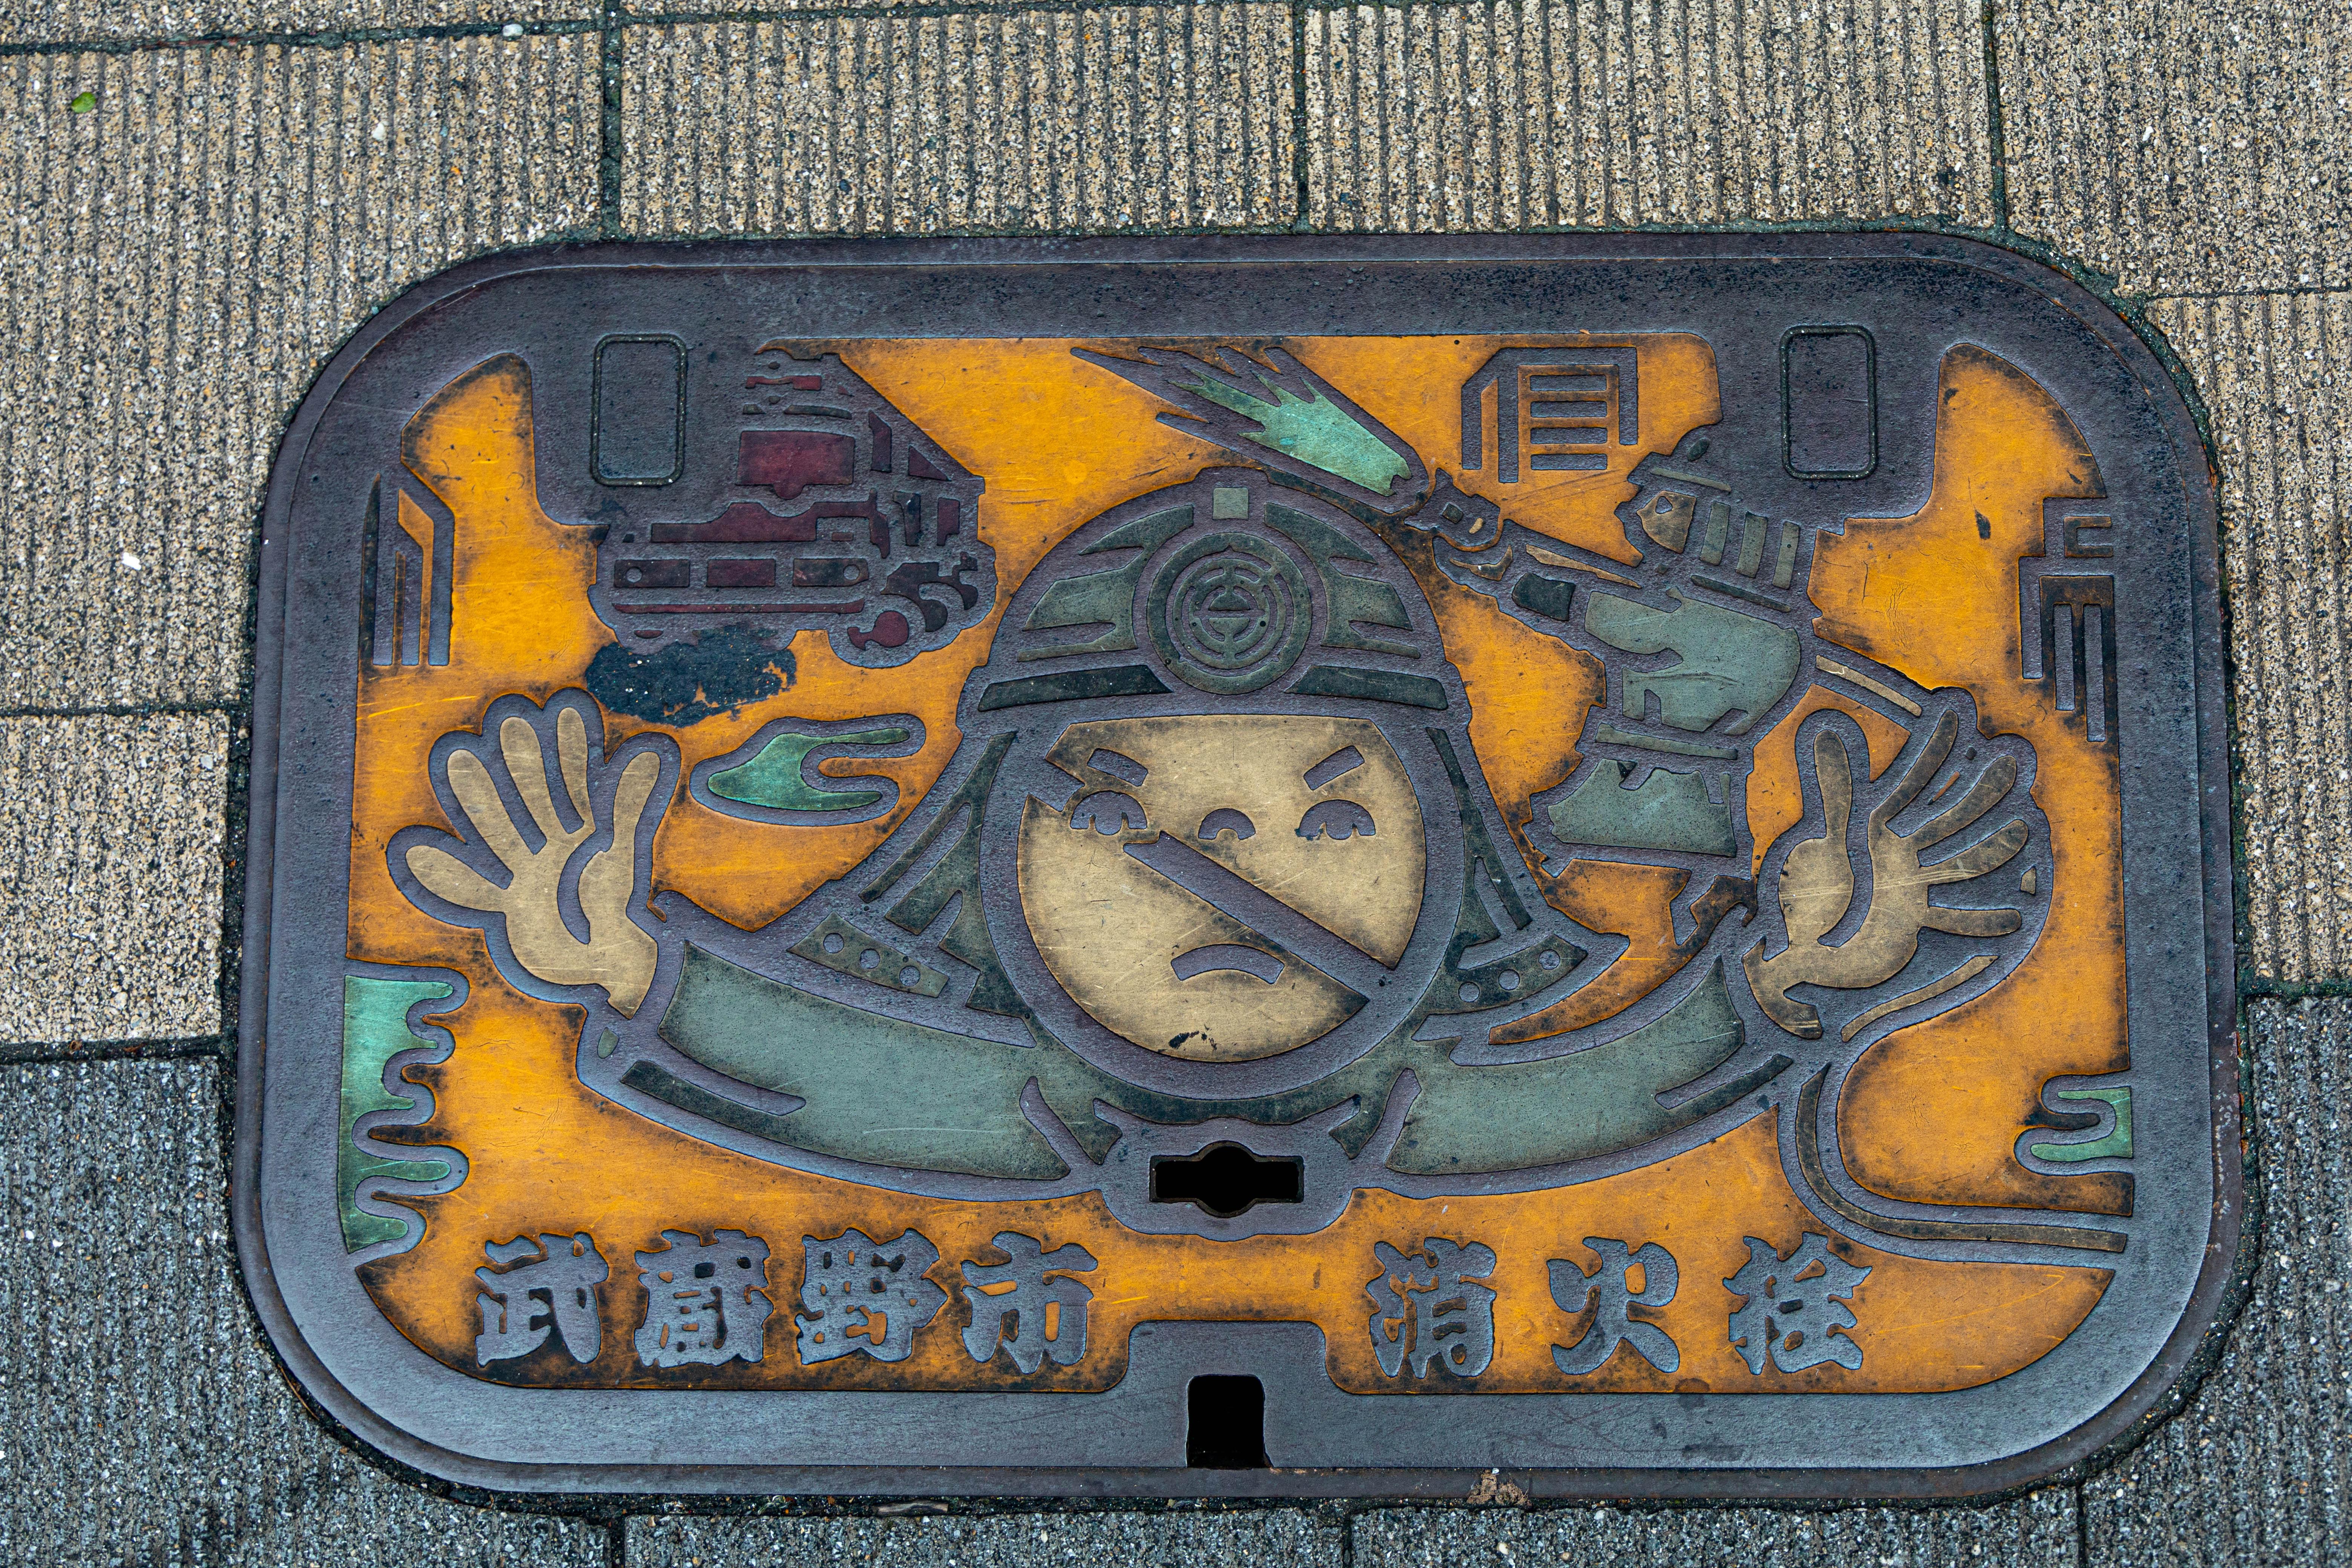 The fire hose covers in Tokyo are neat.